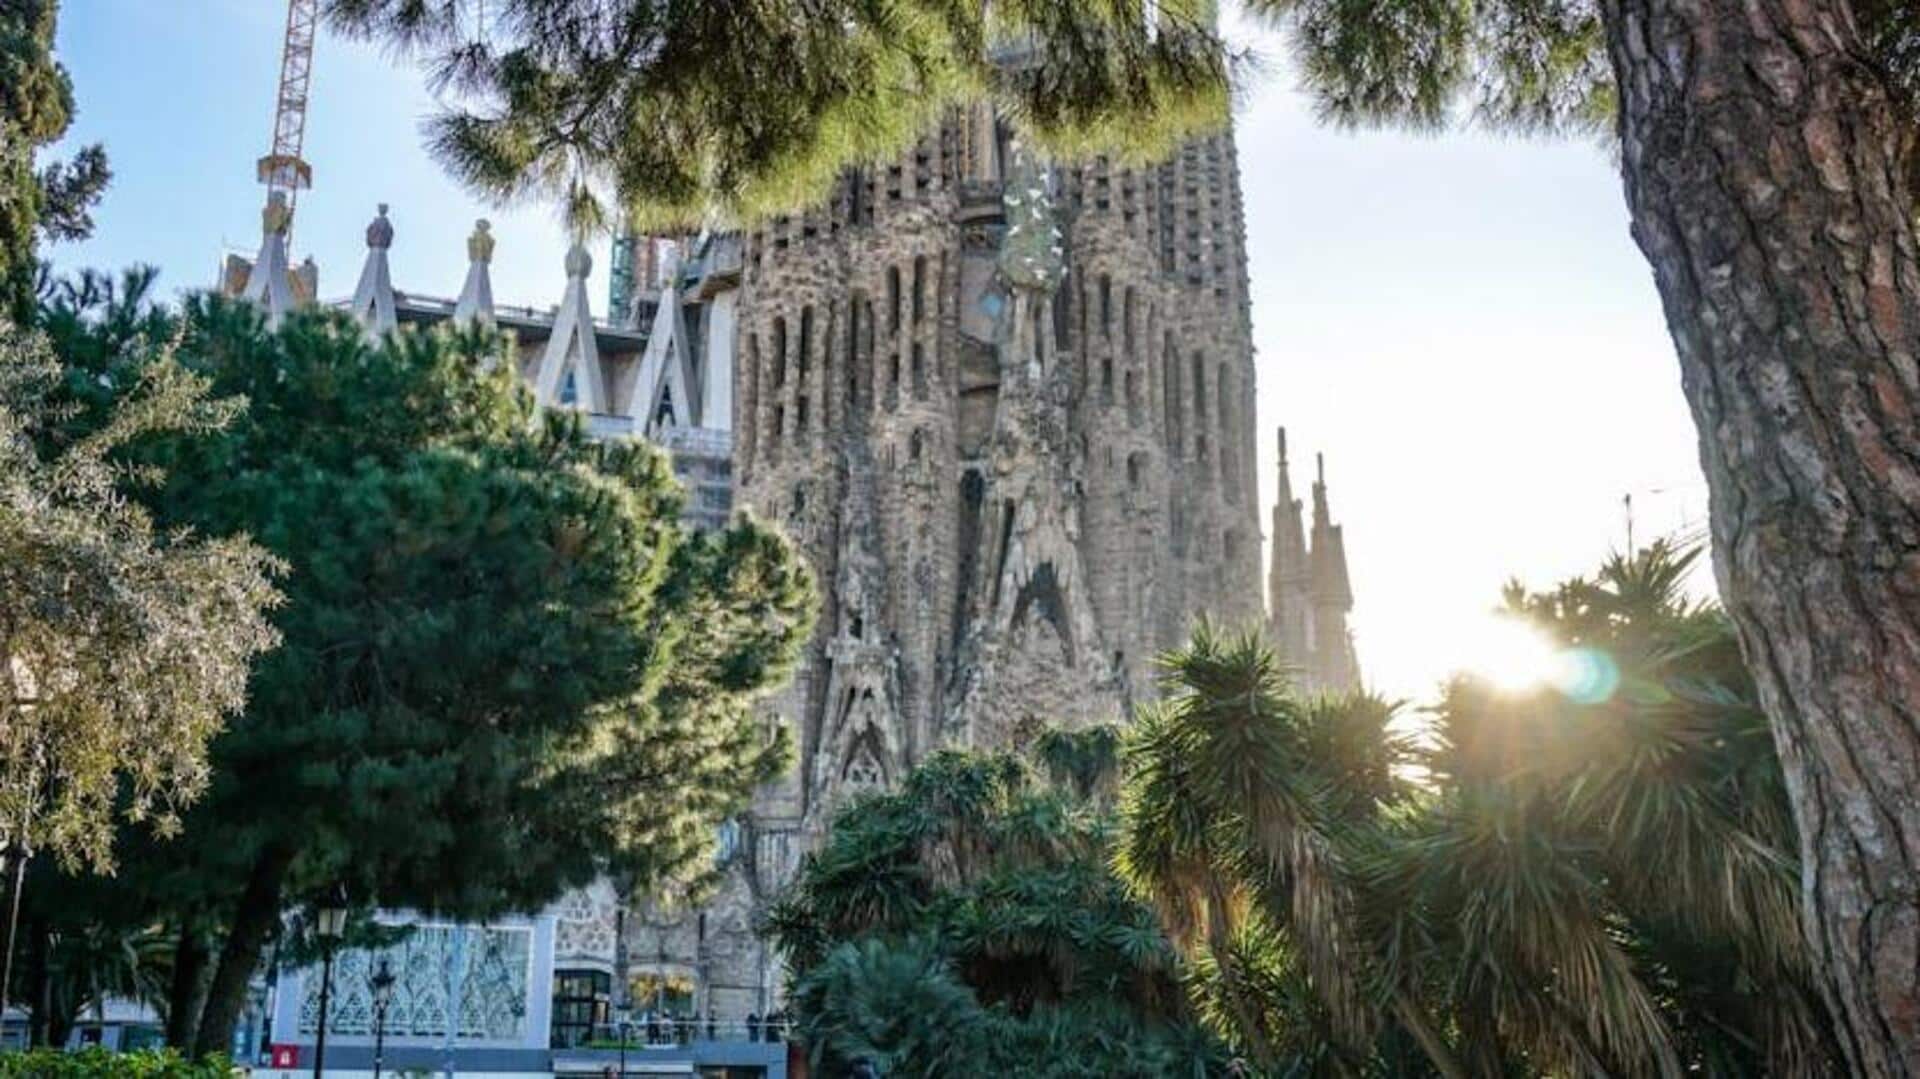 Barcelona's art and architecture are worth adding to your itinerary